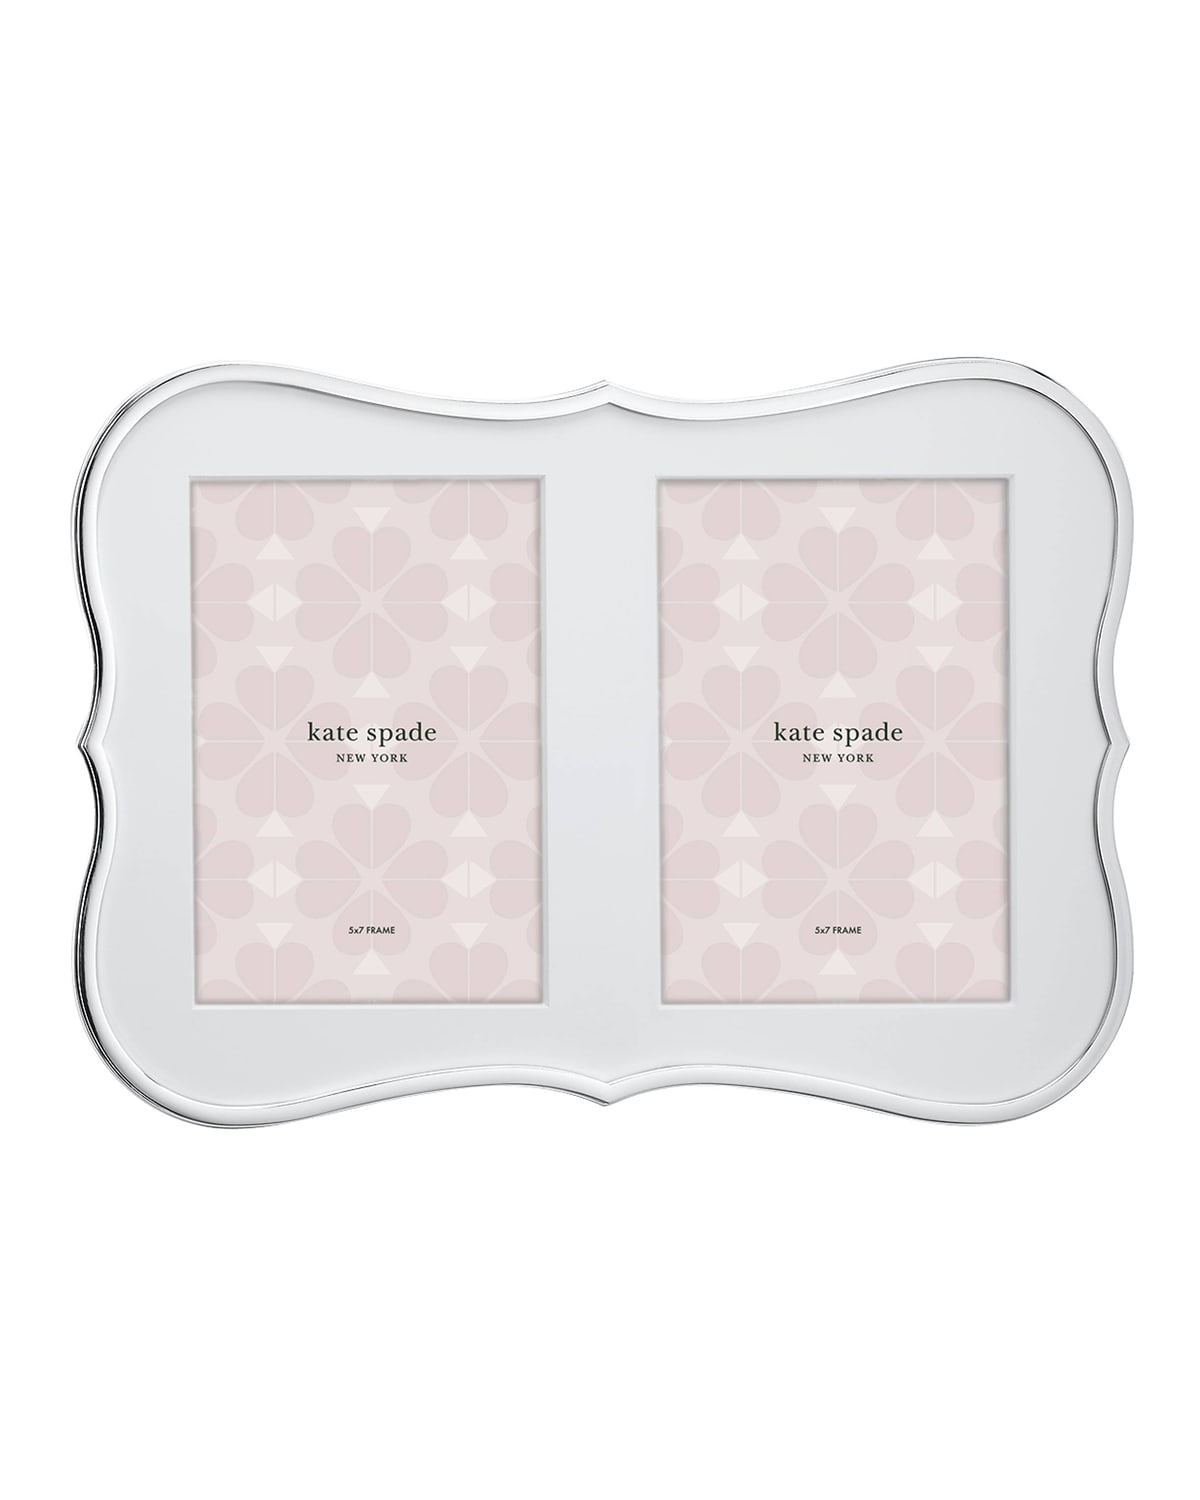 Image kate spade new york crown point double invitation picture frame, silver